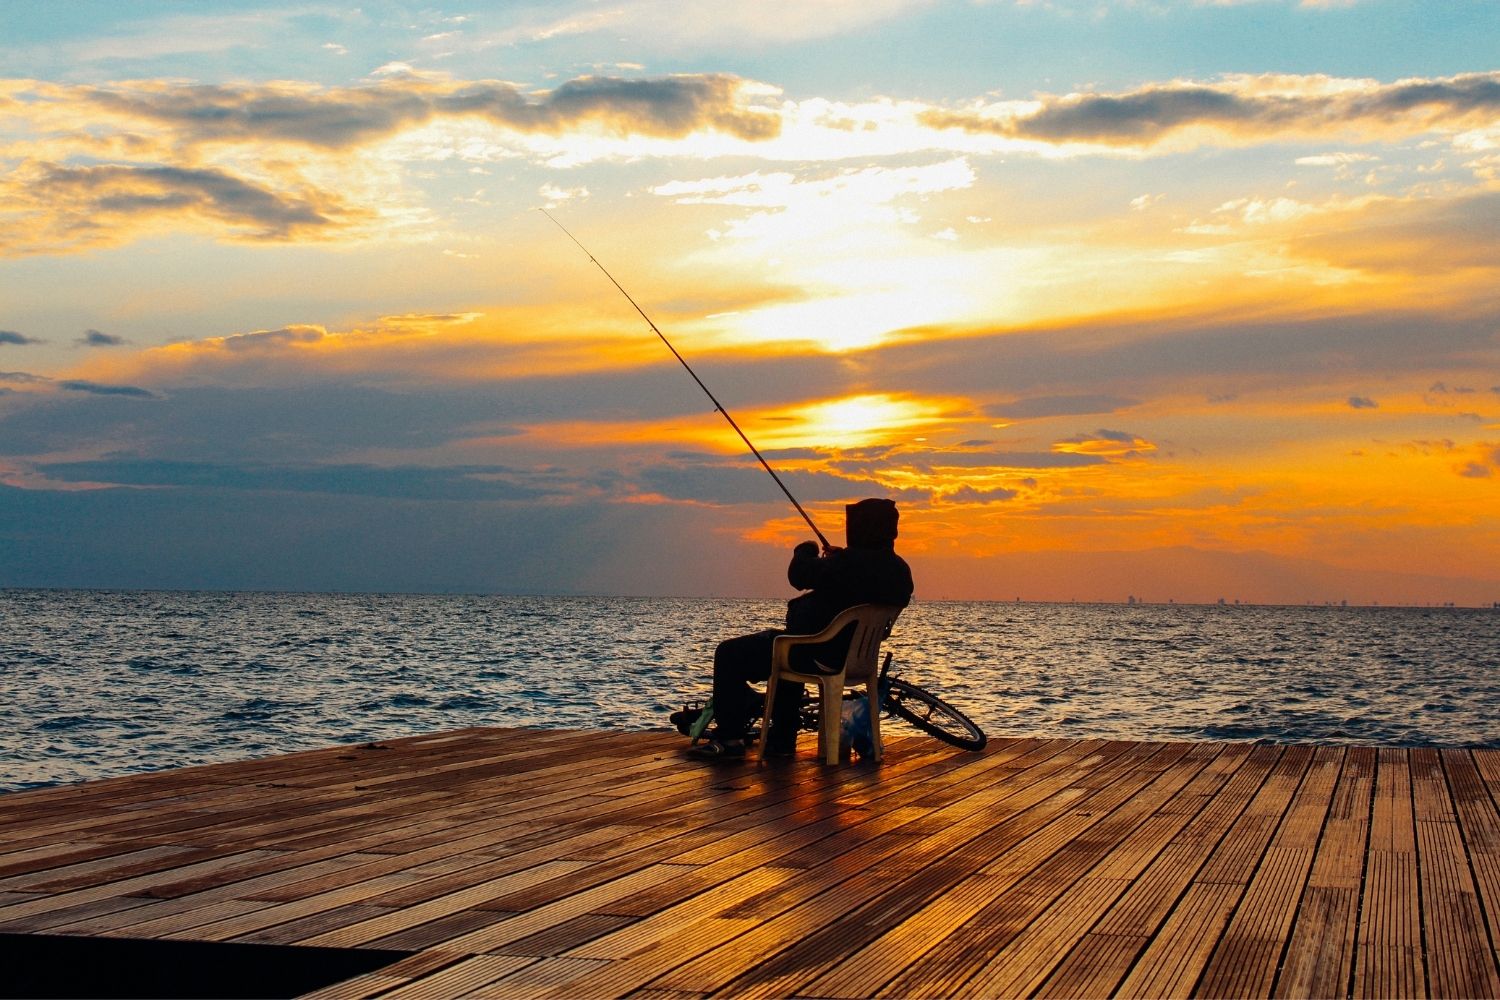 Where to Find the Best Spots for Fishing in the Finger Lakes